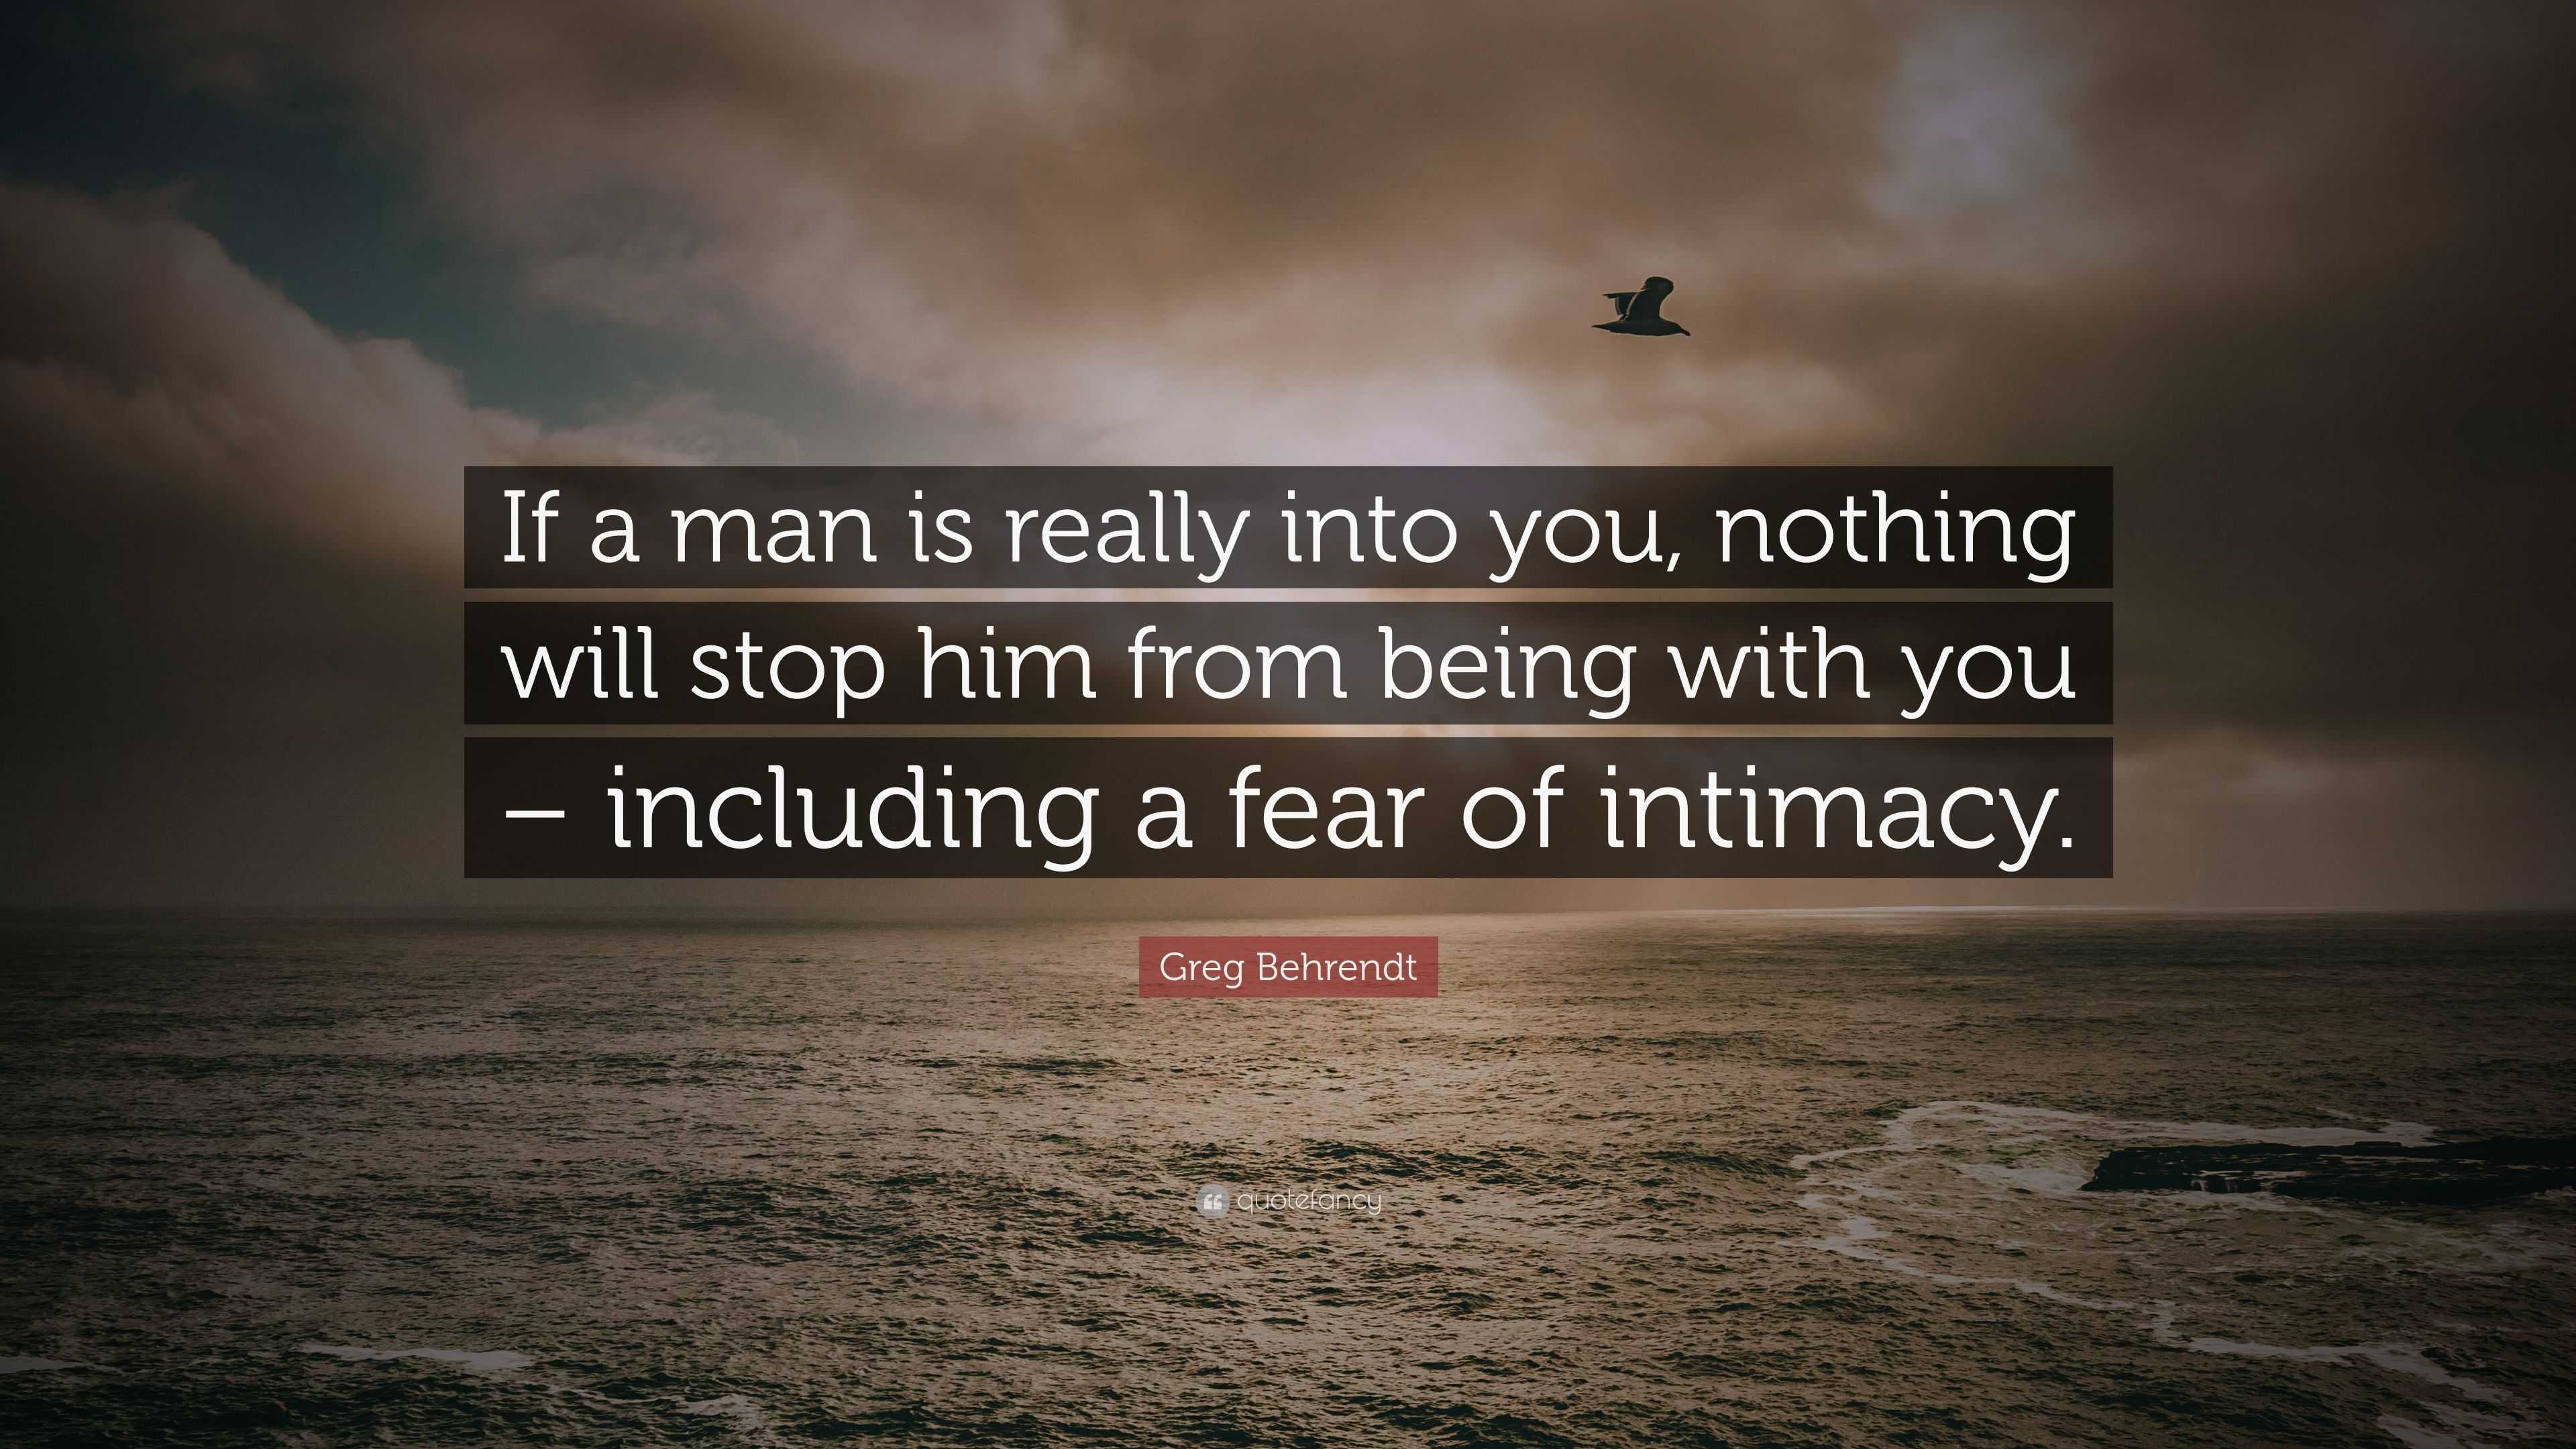 Greg Behrendt Quote: “If a man is really into you, nothing will stop ...